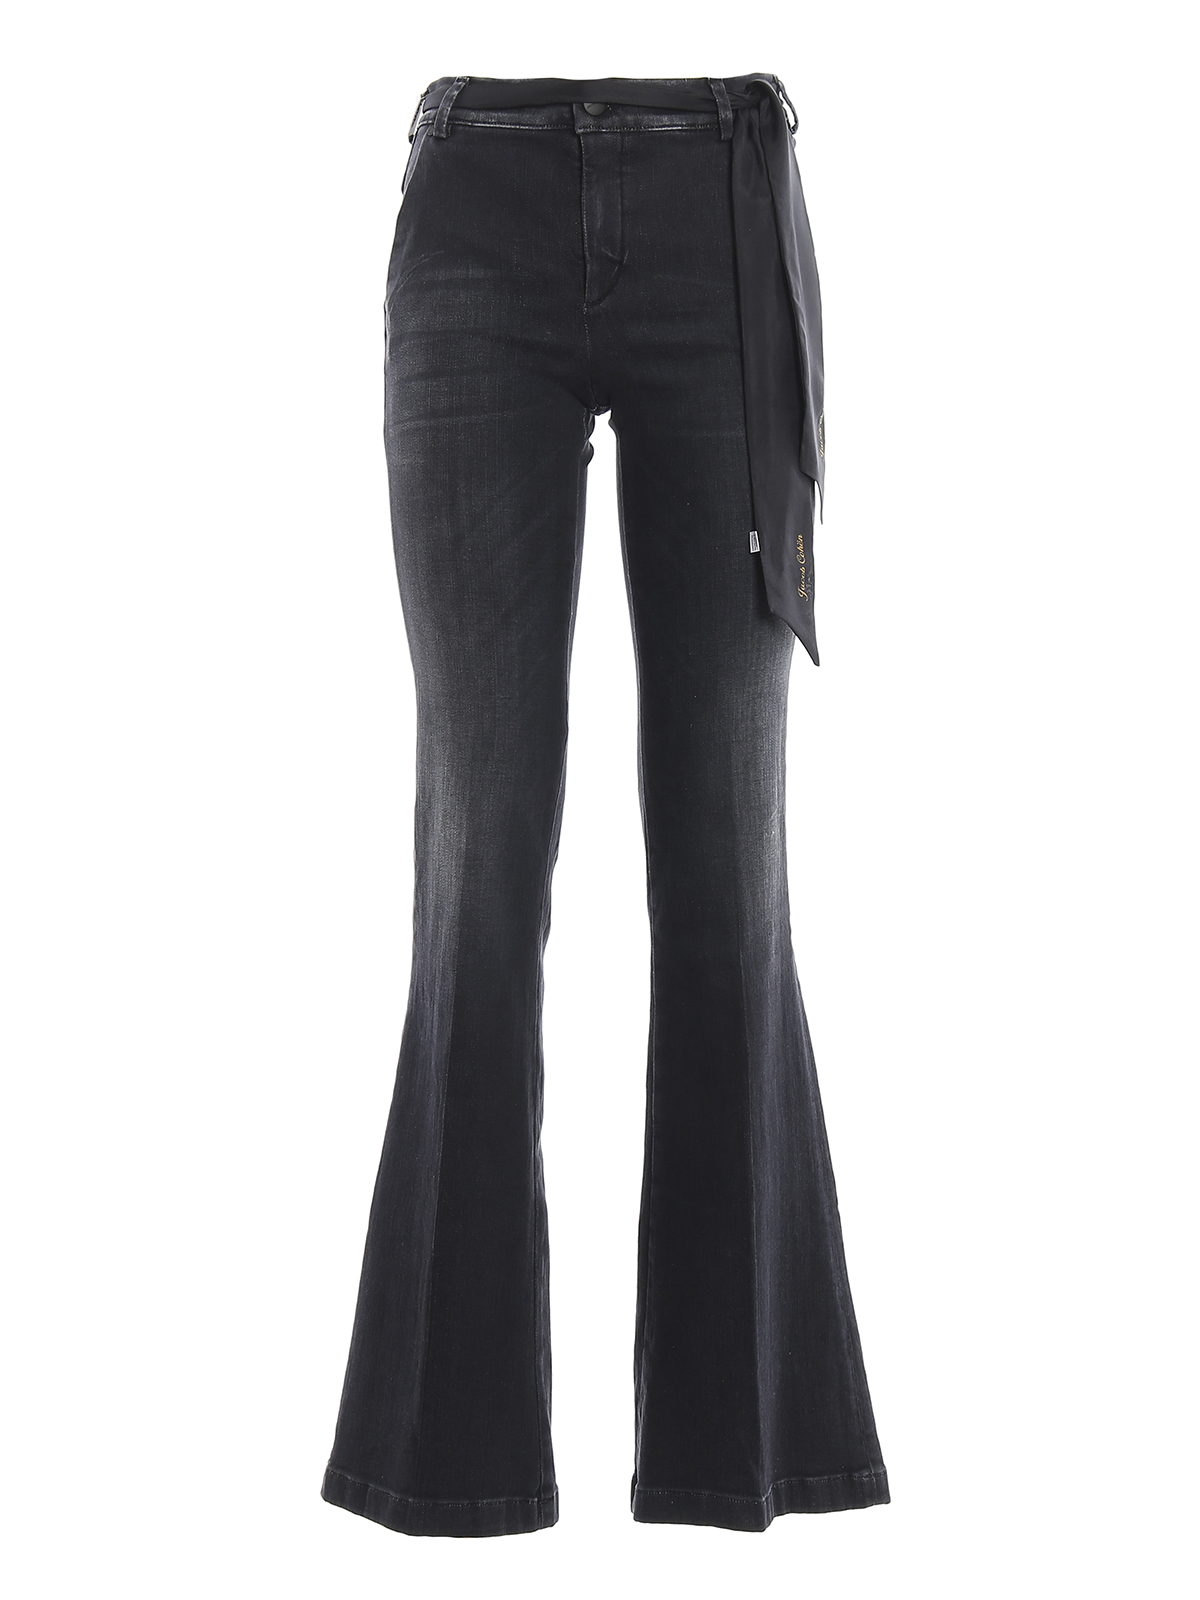 Jacob Cohen Jade Flared Jeans In Black